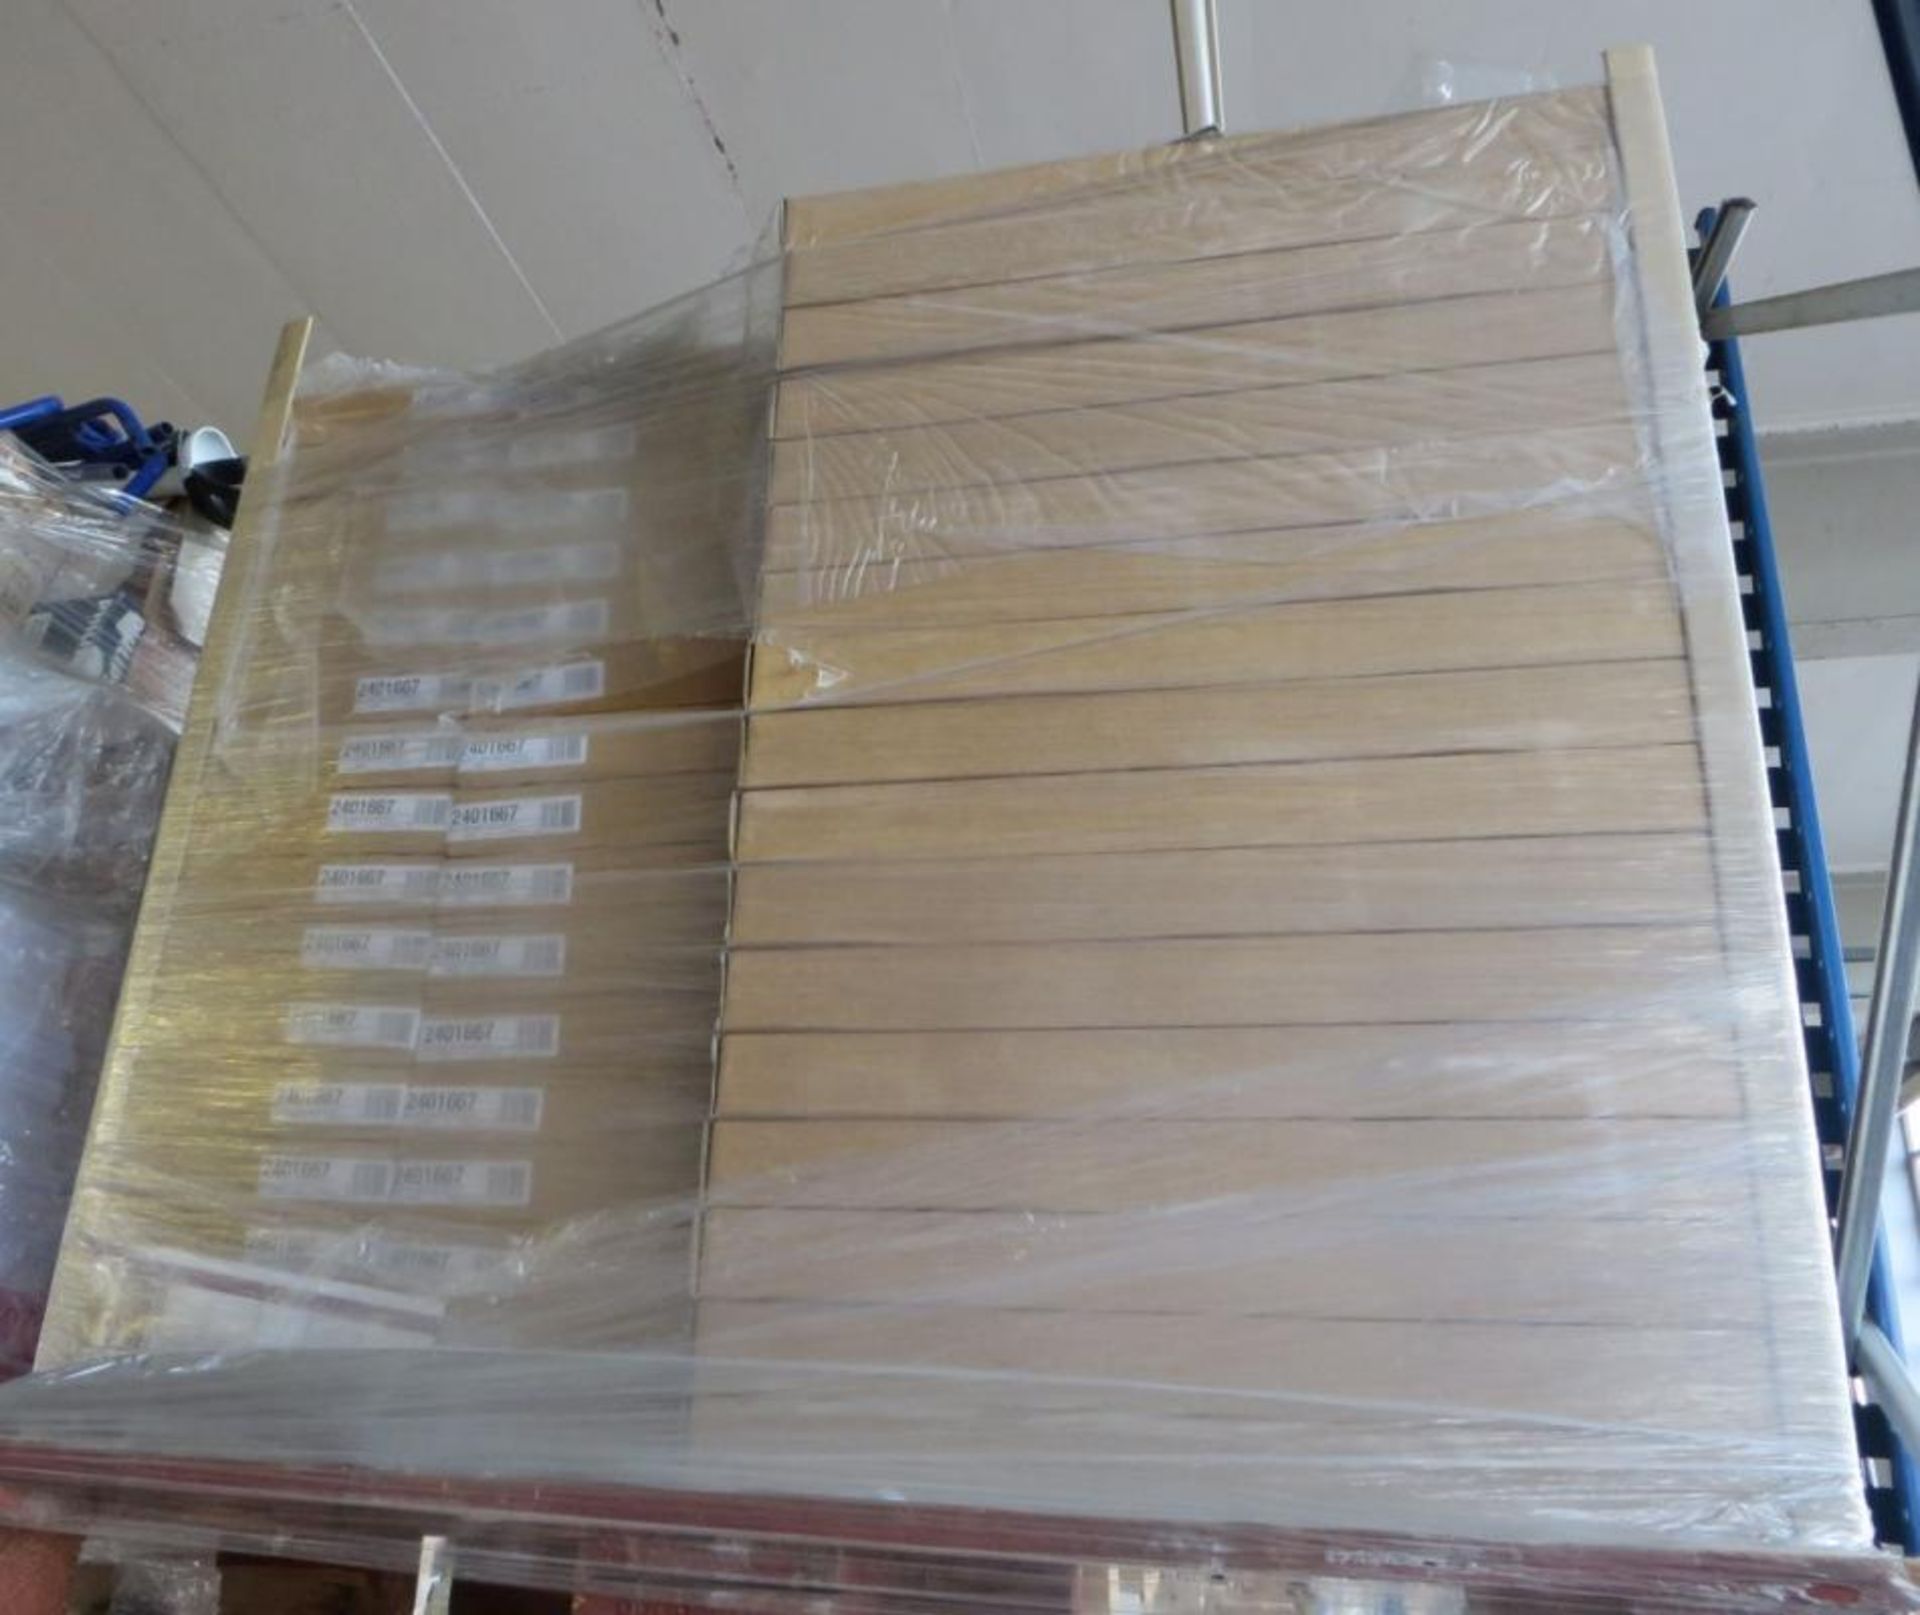 80 x Boxes of 5 x Large Sasco 2014/2015 Academic Planner - Ref: DRT0196 - CL185 - Location: Stoke-on - Image 6 of 8